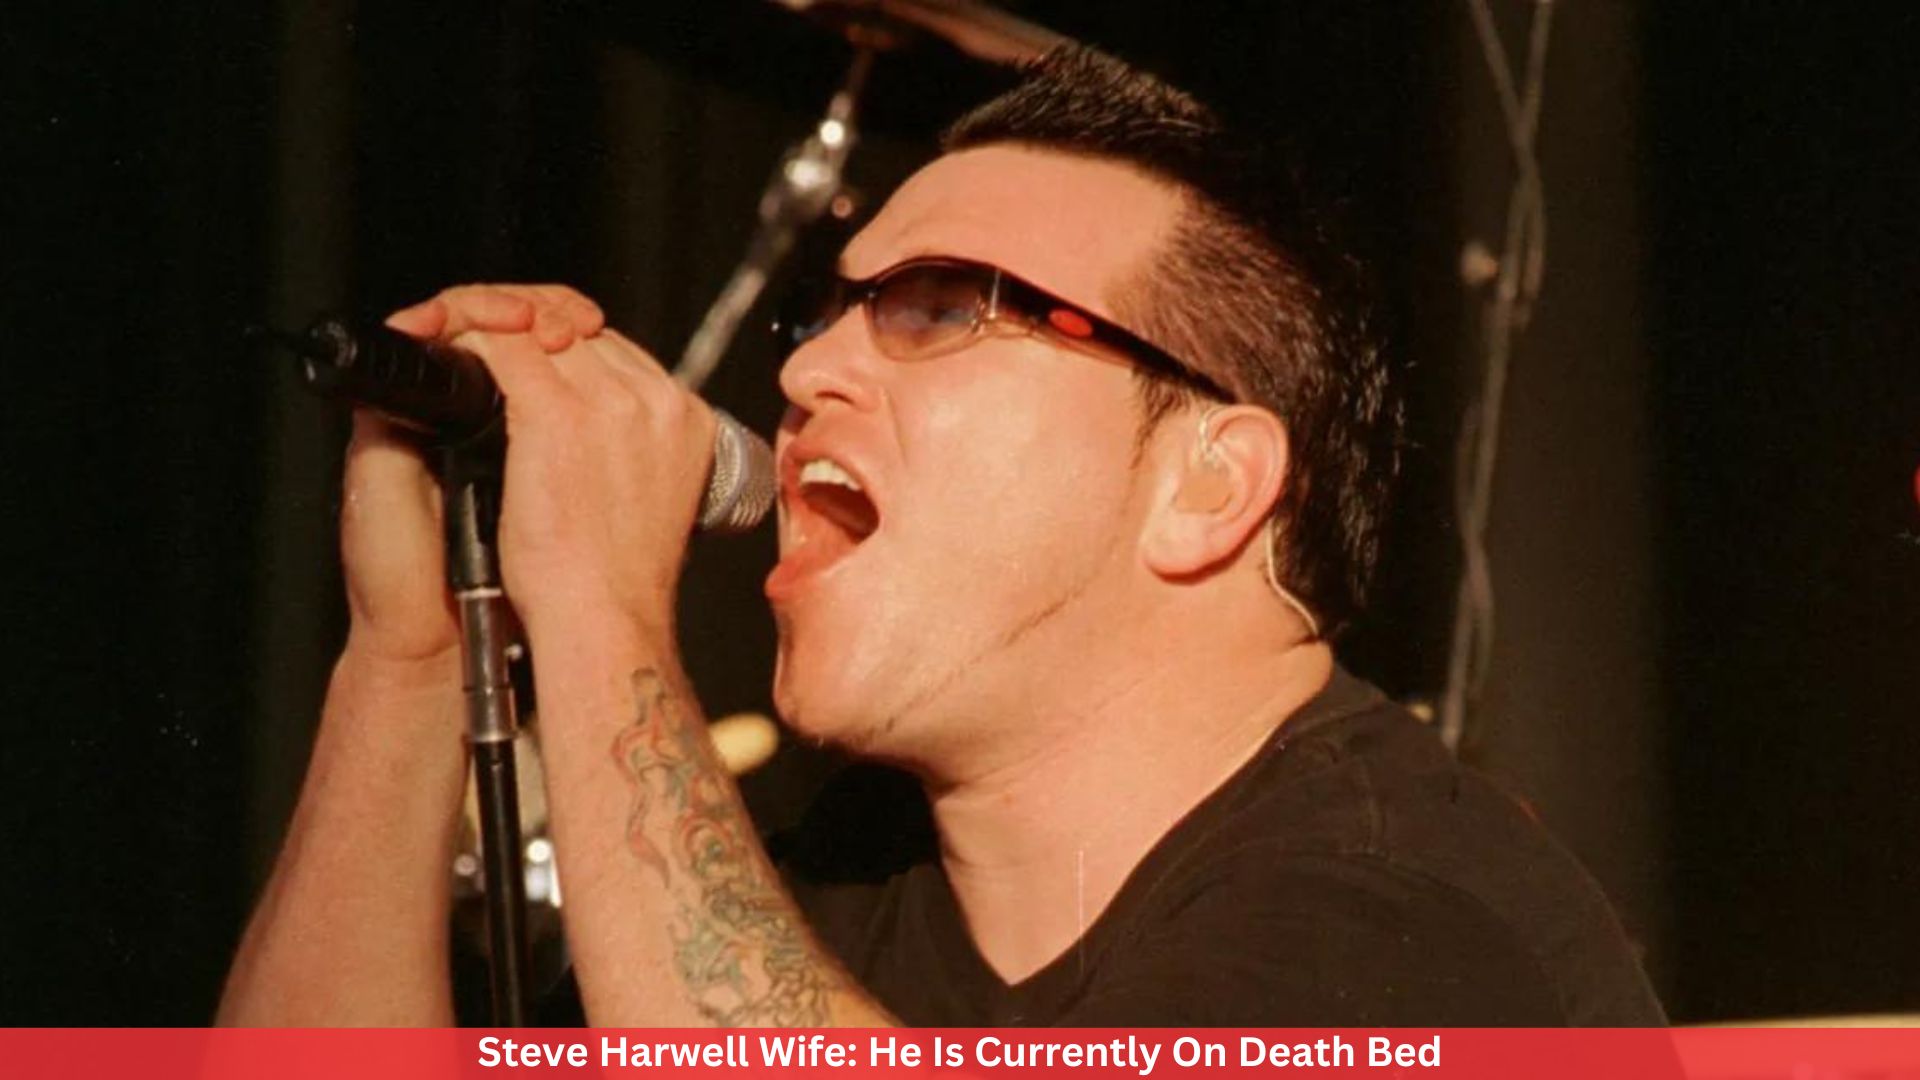 Steve Harwell Wife: He Is Currently On Death Bed